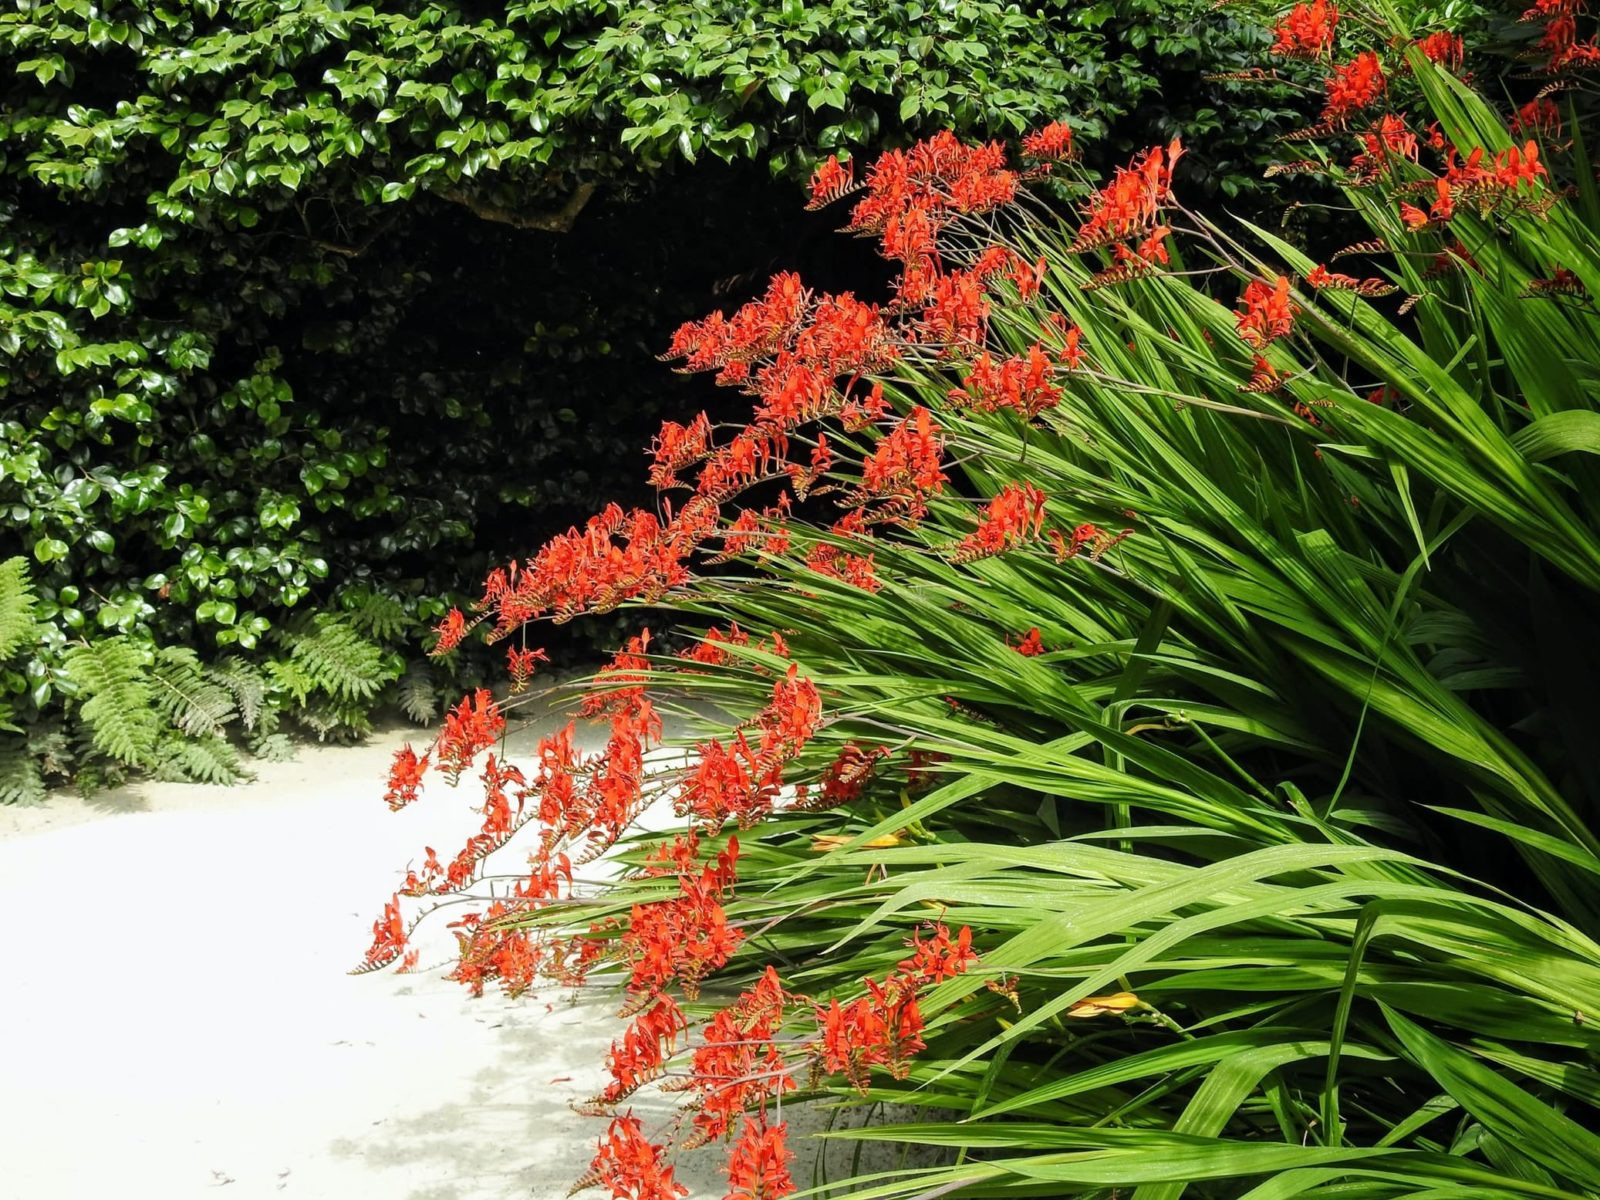 Crocosmia 'Lucifer' Care & Growing Tips | Horticulture.co.uk